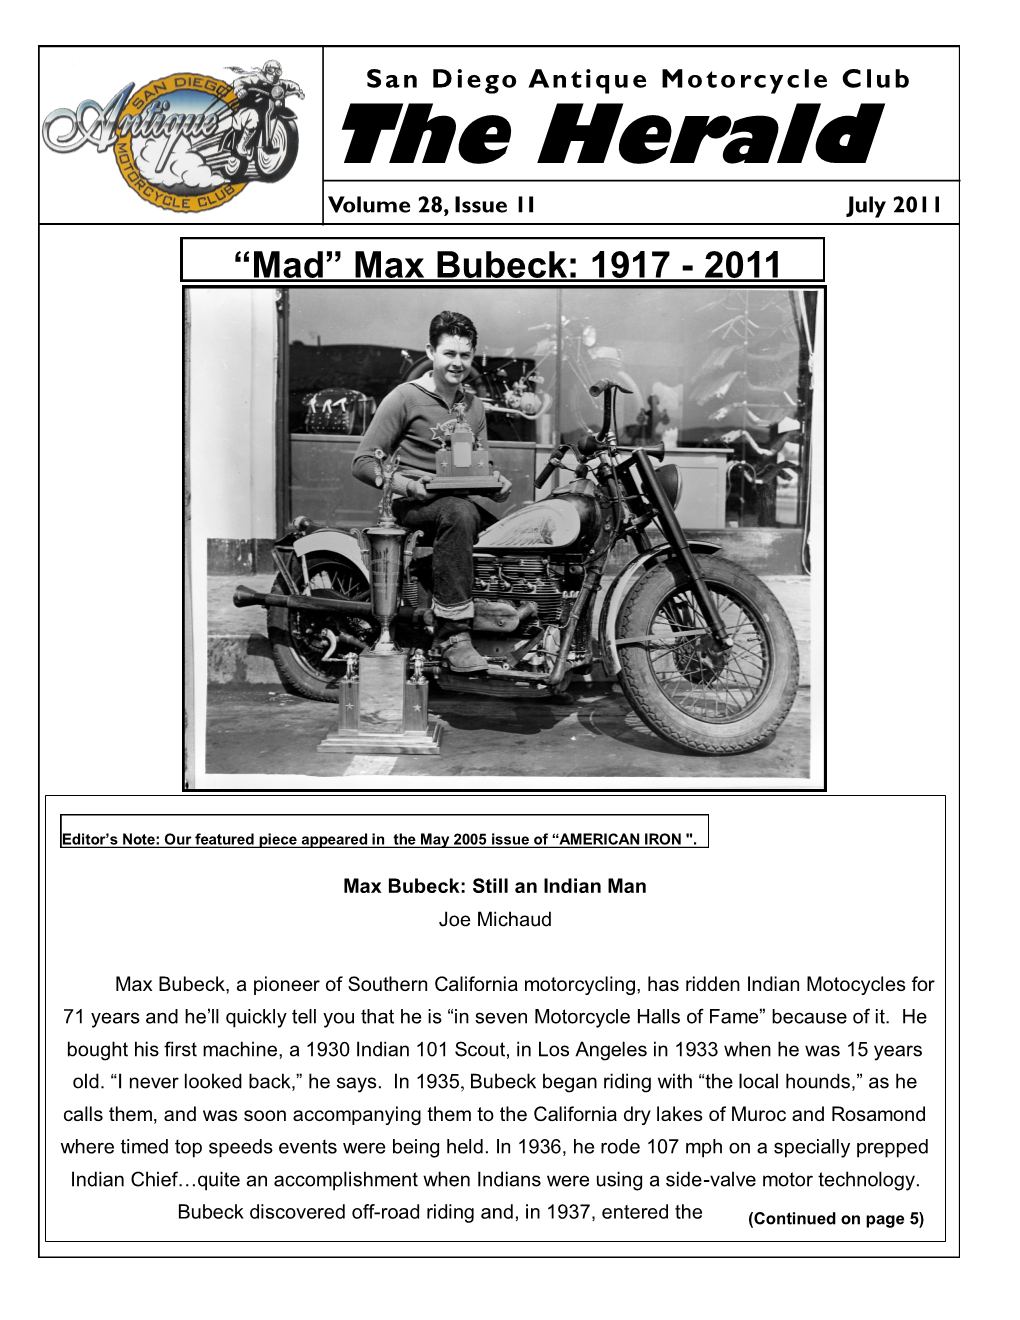 The Herald Volume 28, Issue 1I July 2011 “Mad” Max Bubeck: 1917 - 2011